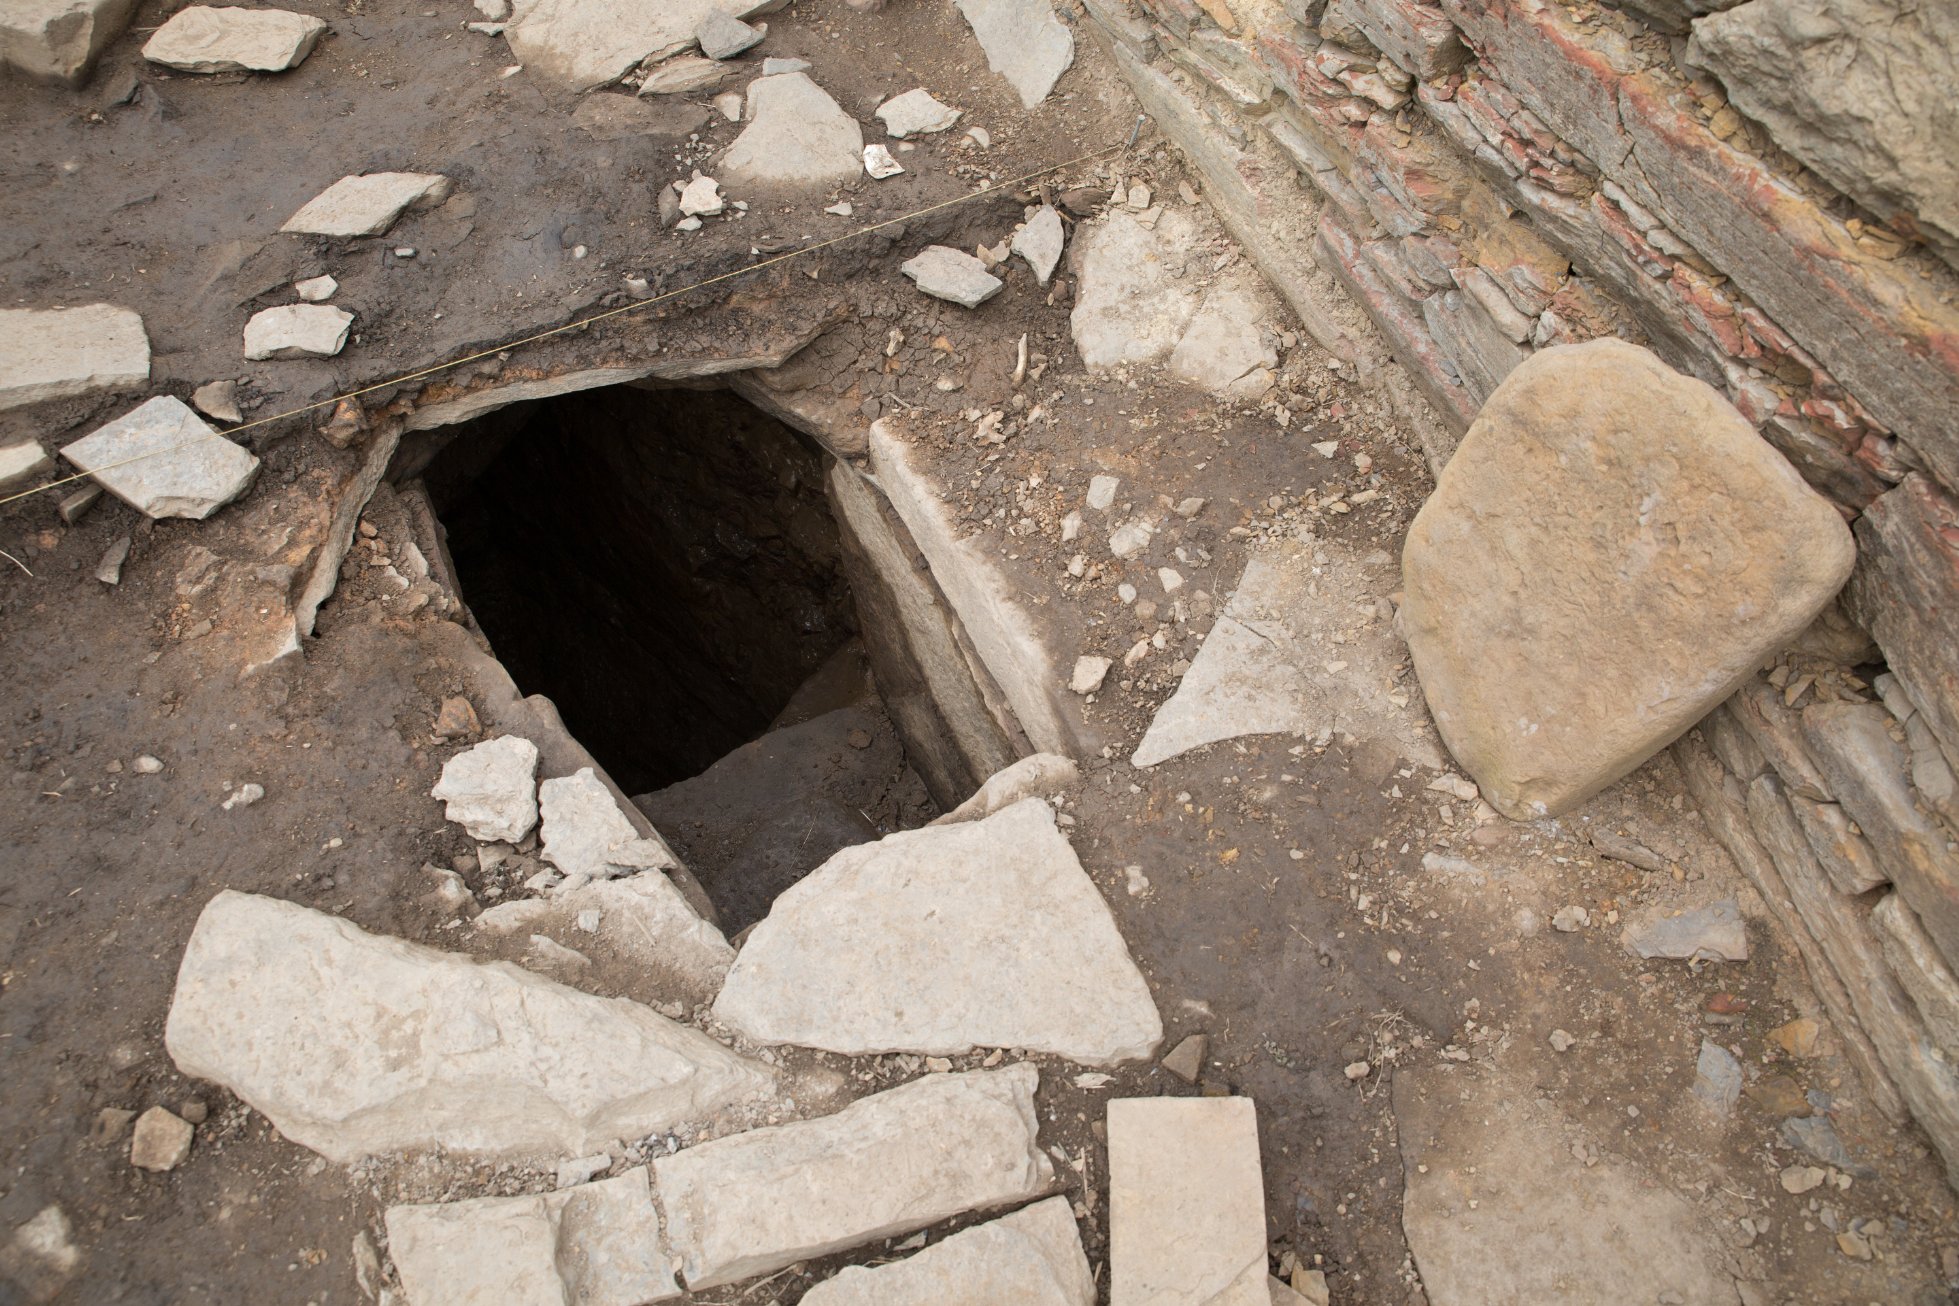 This souterrain, a subterranean structure, will be investigated further this year too. It’s hoped new evidence on how and why it was built and used will be discovered.